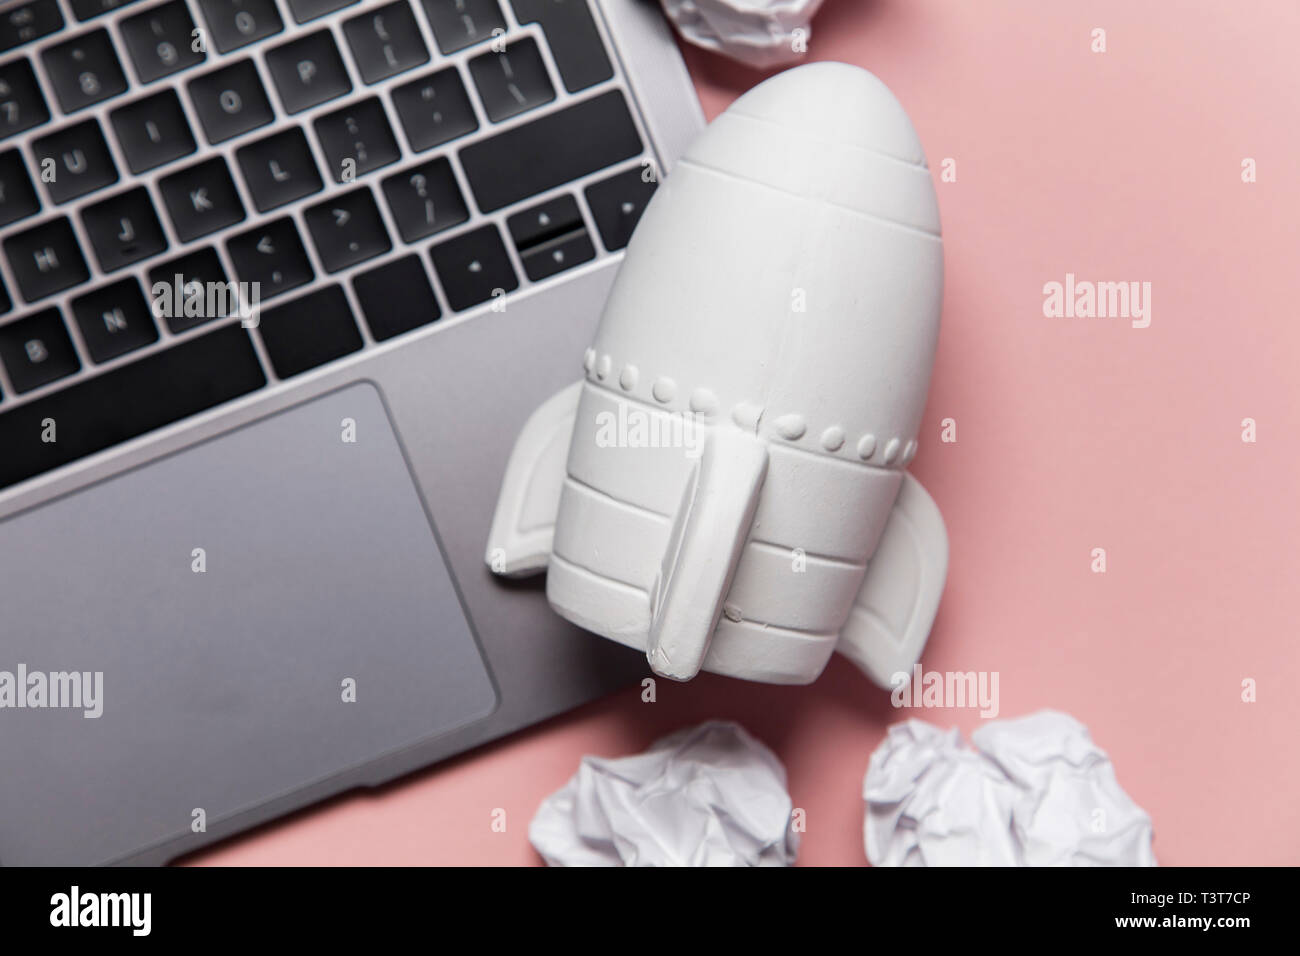 Business startup concept. Rocket taking off with crumpled paper trail Stock Photo